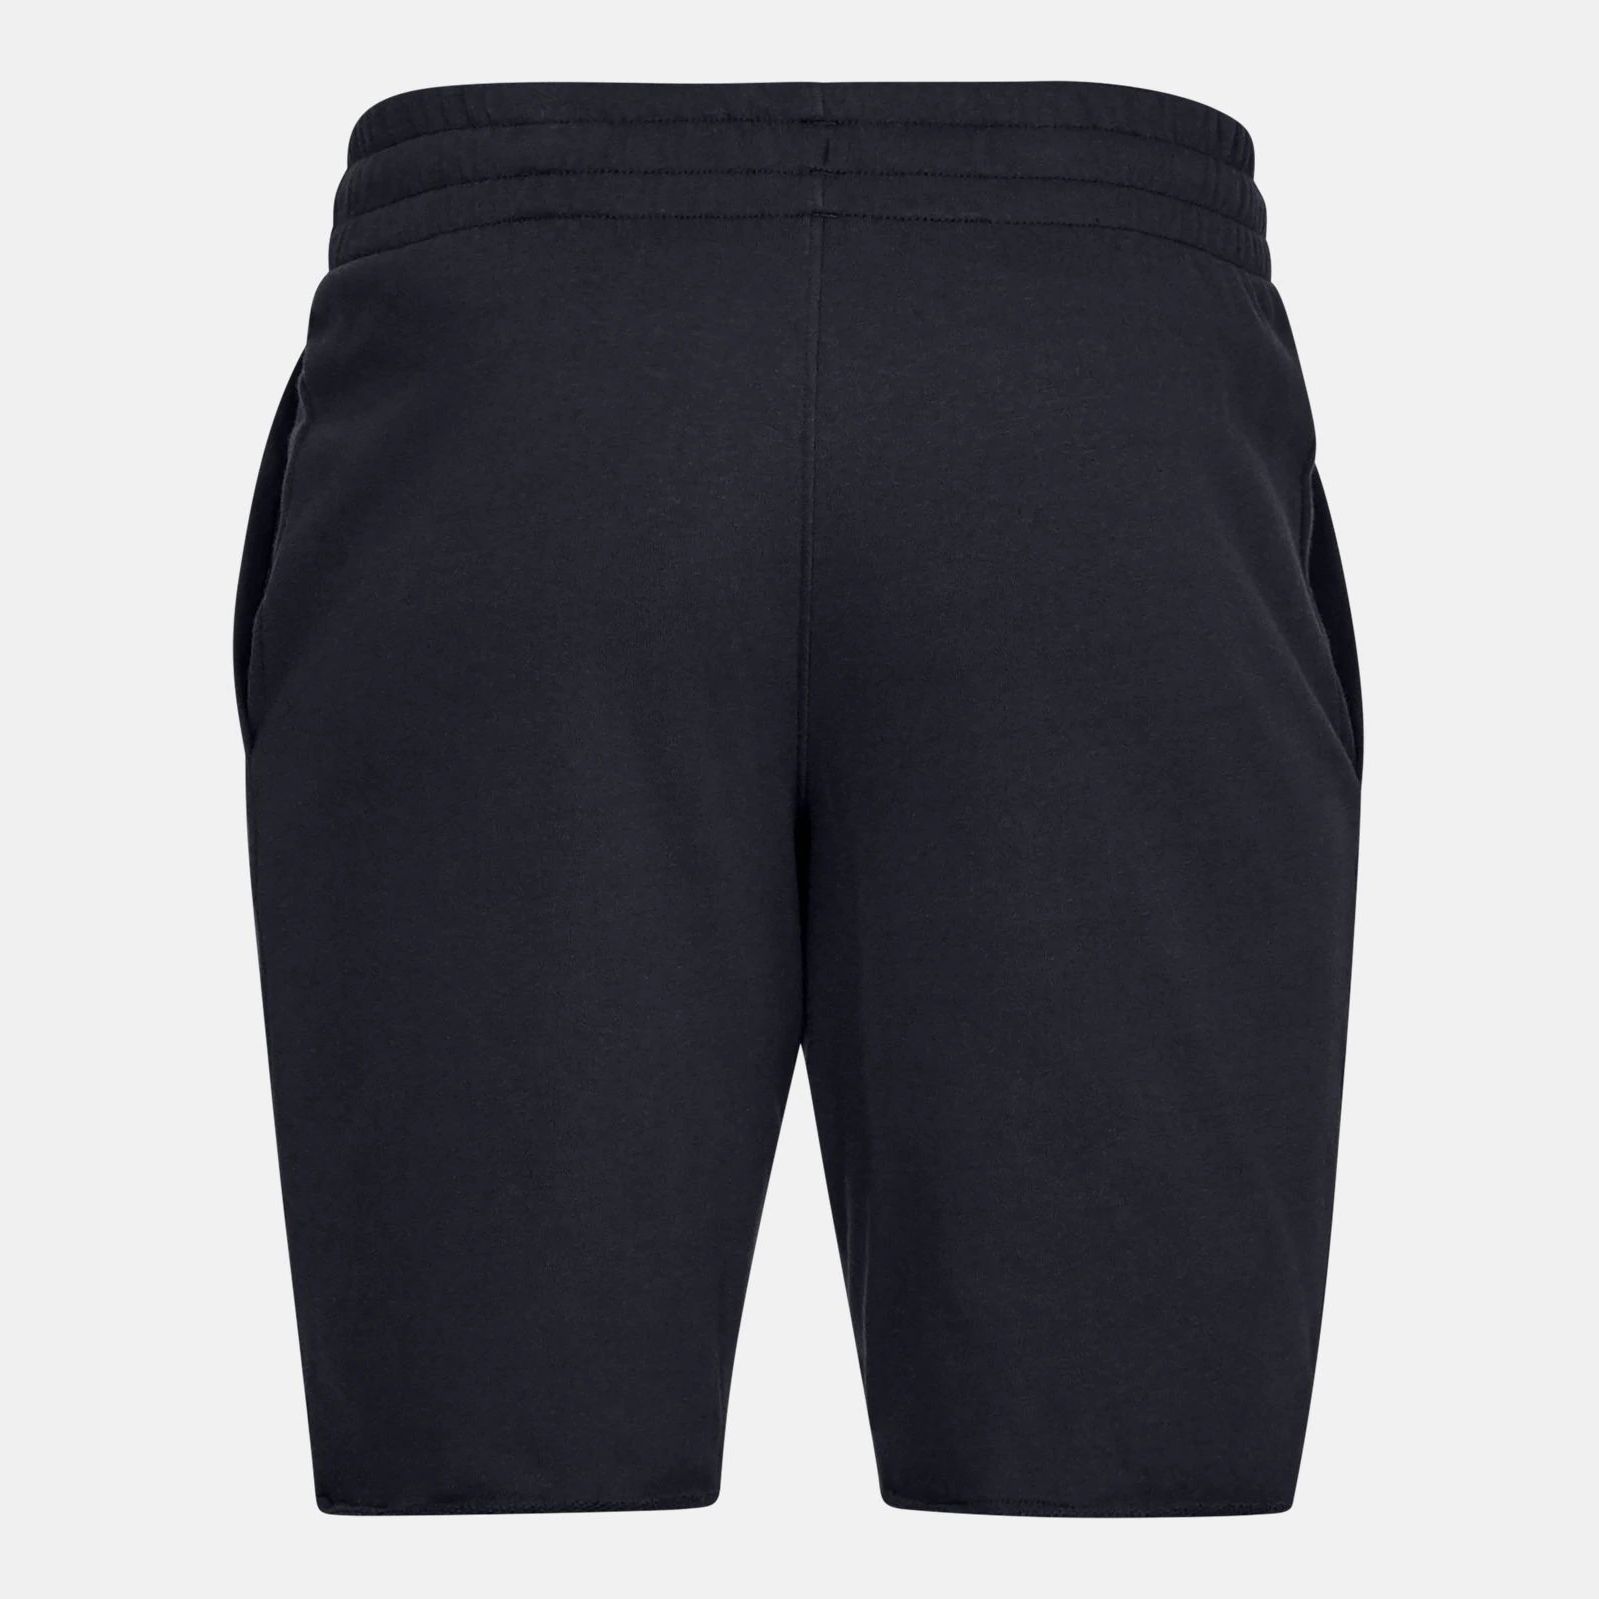 Shorts -  under armour Sportstyle Terry Shorts 9288